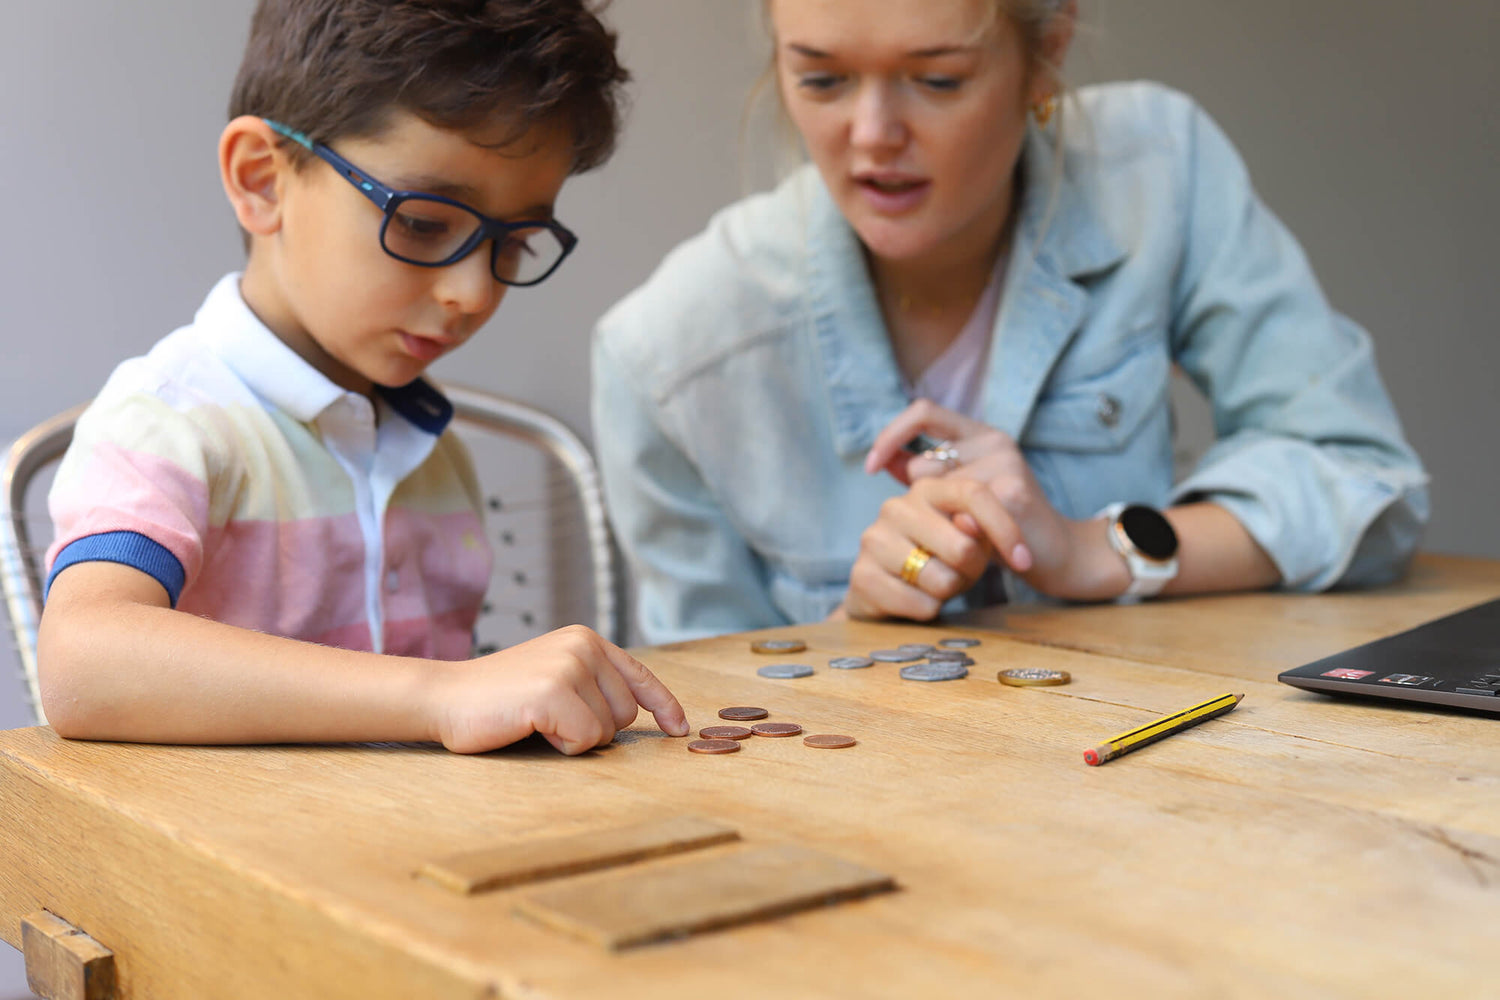 Phoebe tutoring a young boy in glasses counting coins